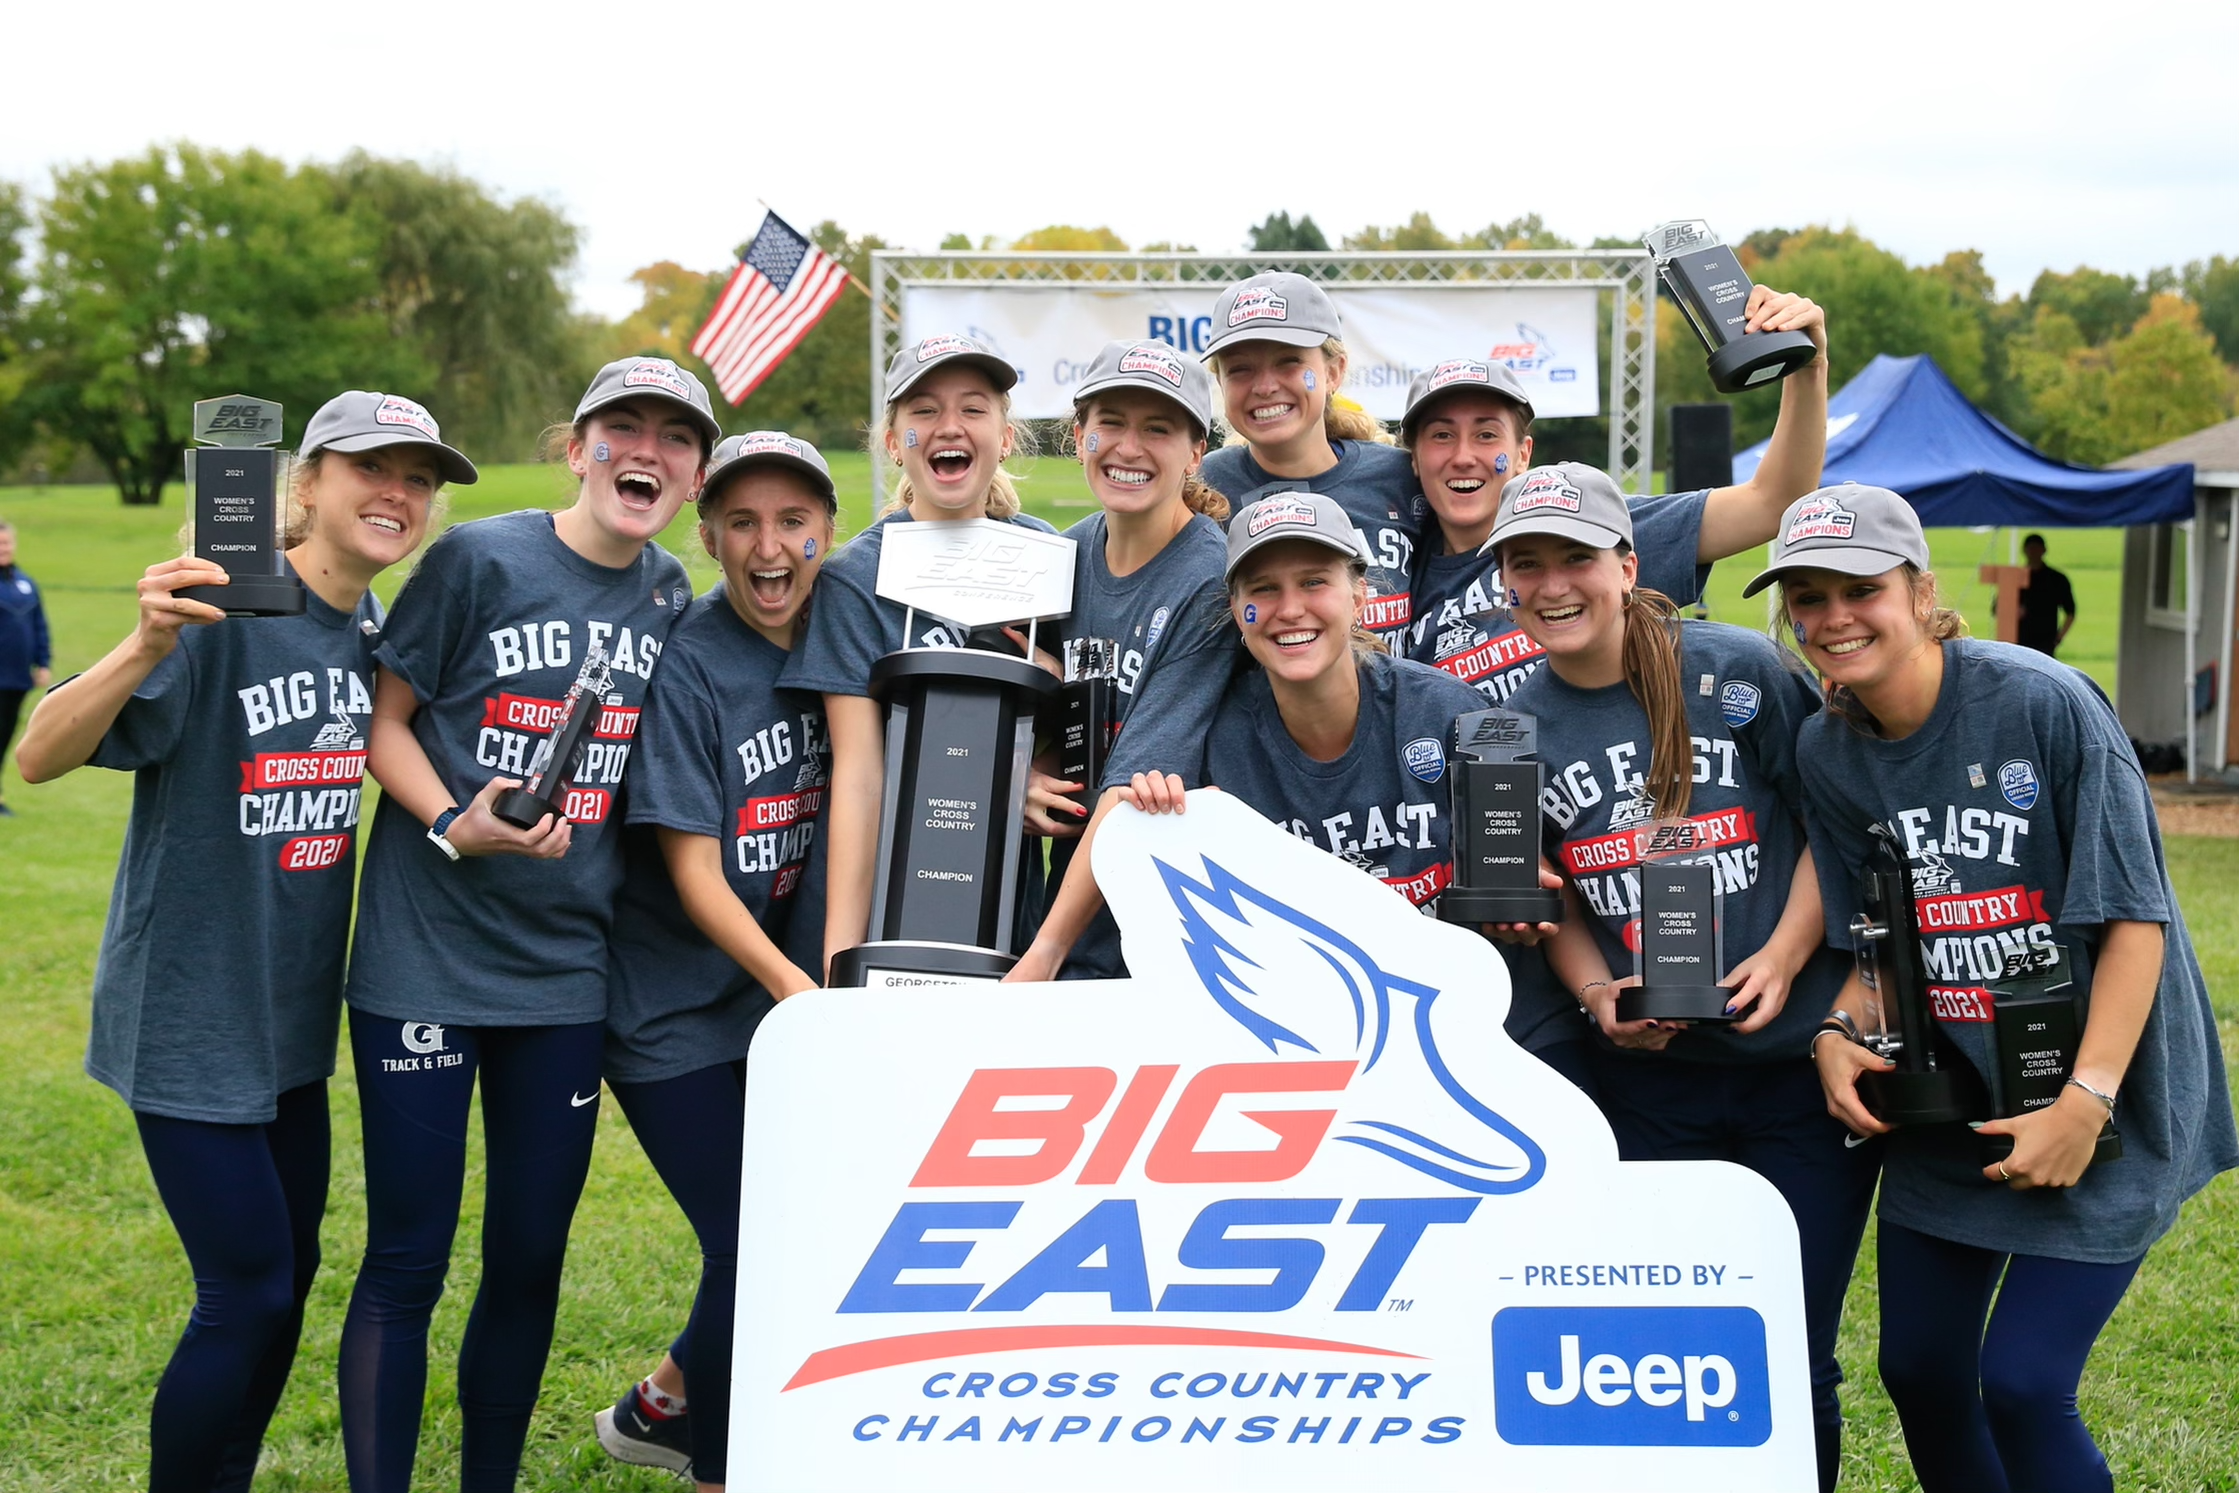 a group of women smile holding a trophy and banner saying BIG EAST